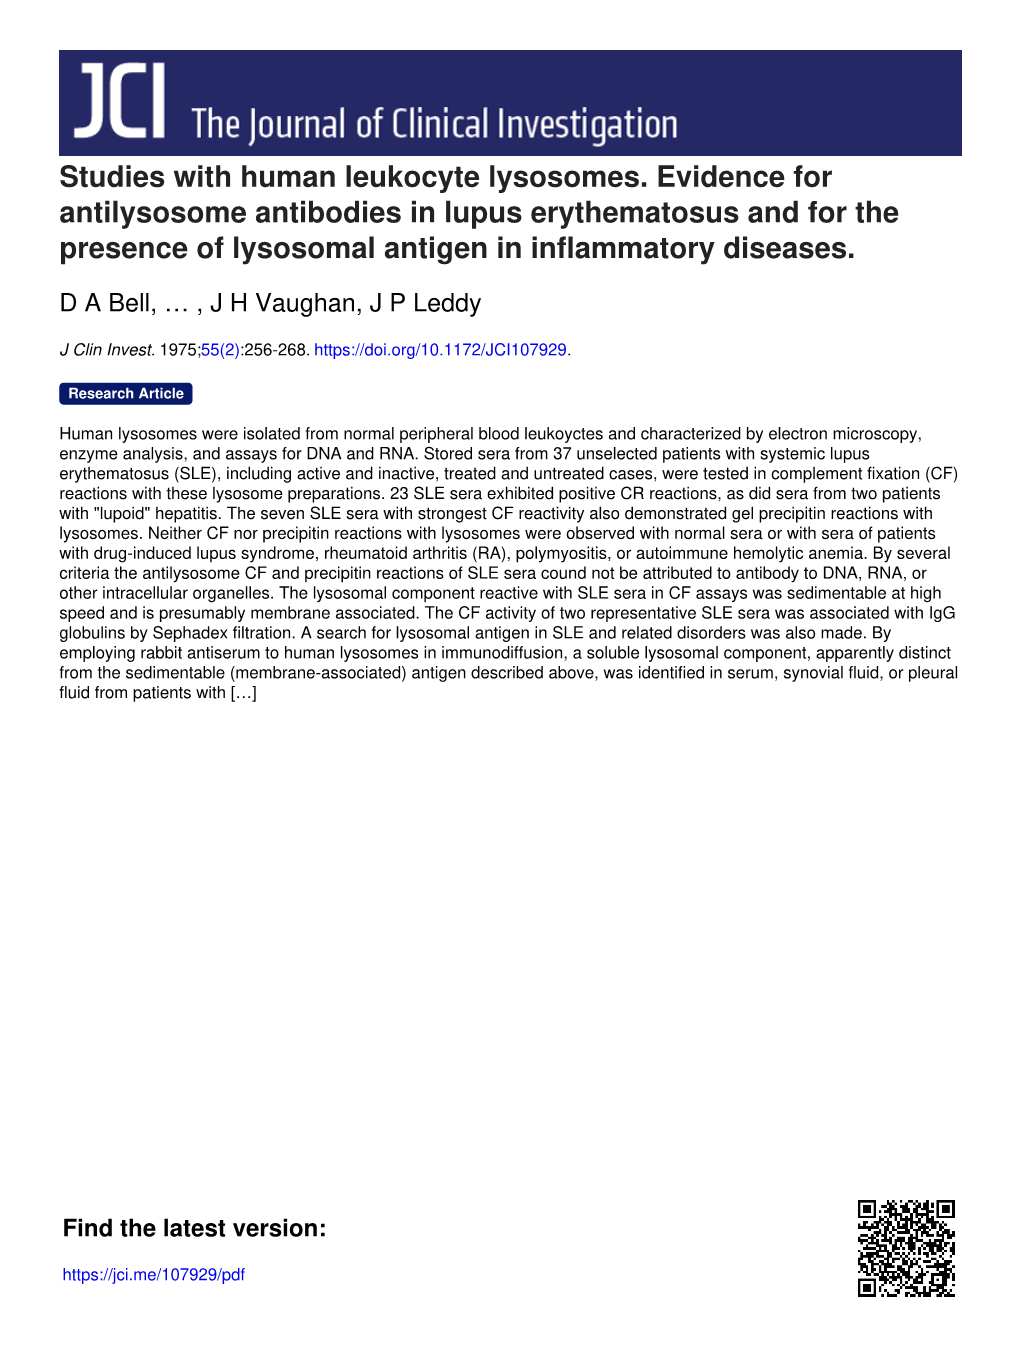 Studies with Human Leukocyte Lysosomes. Evidence for Antilysosome Antibodies in Lupus Erythematosus and for the Presence of Lysosomal Antigen in Inflammatory Diseases